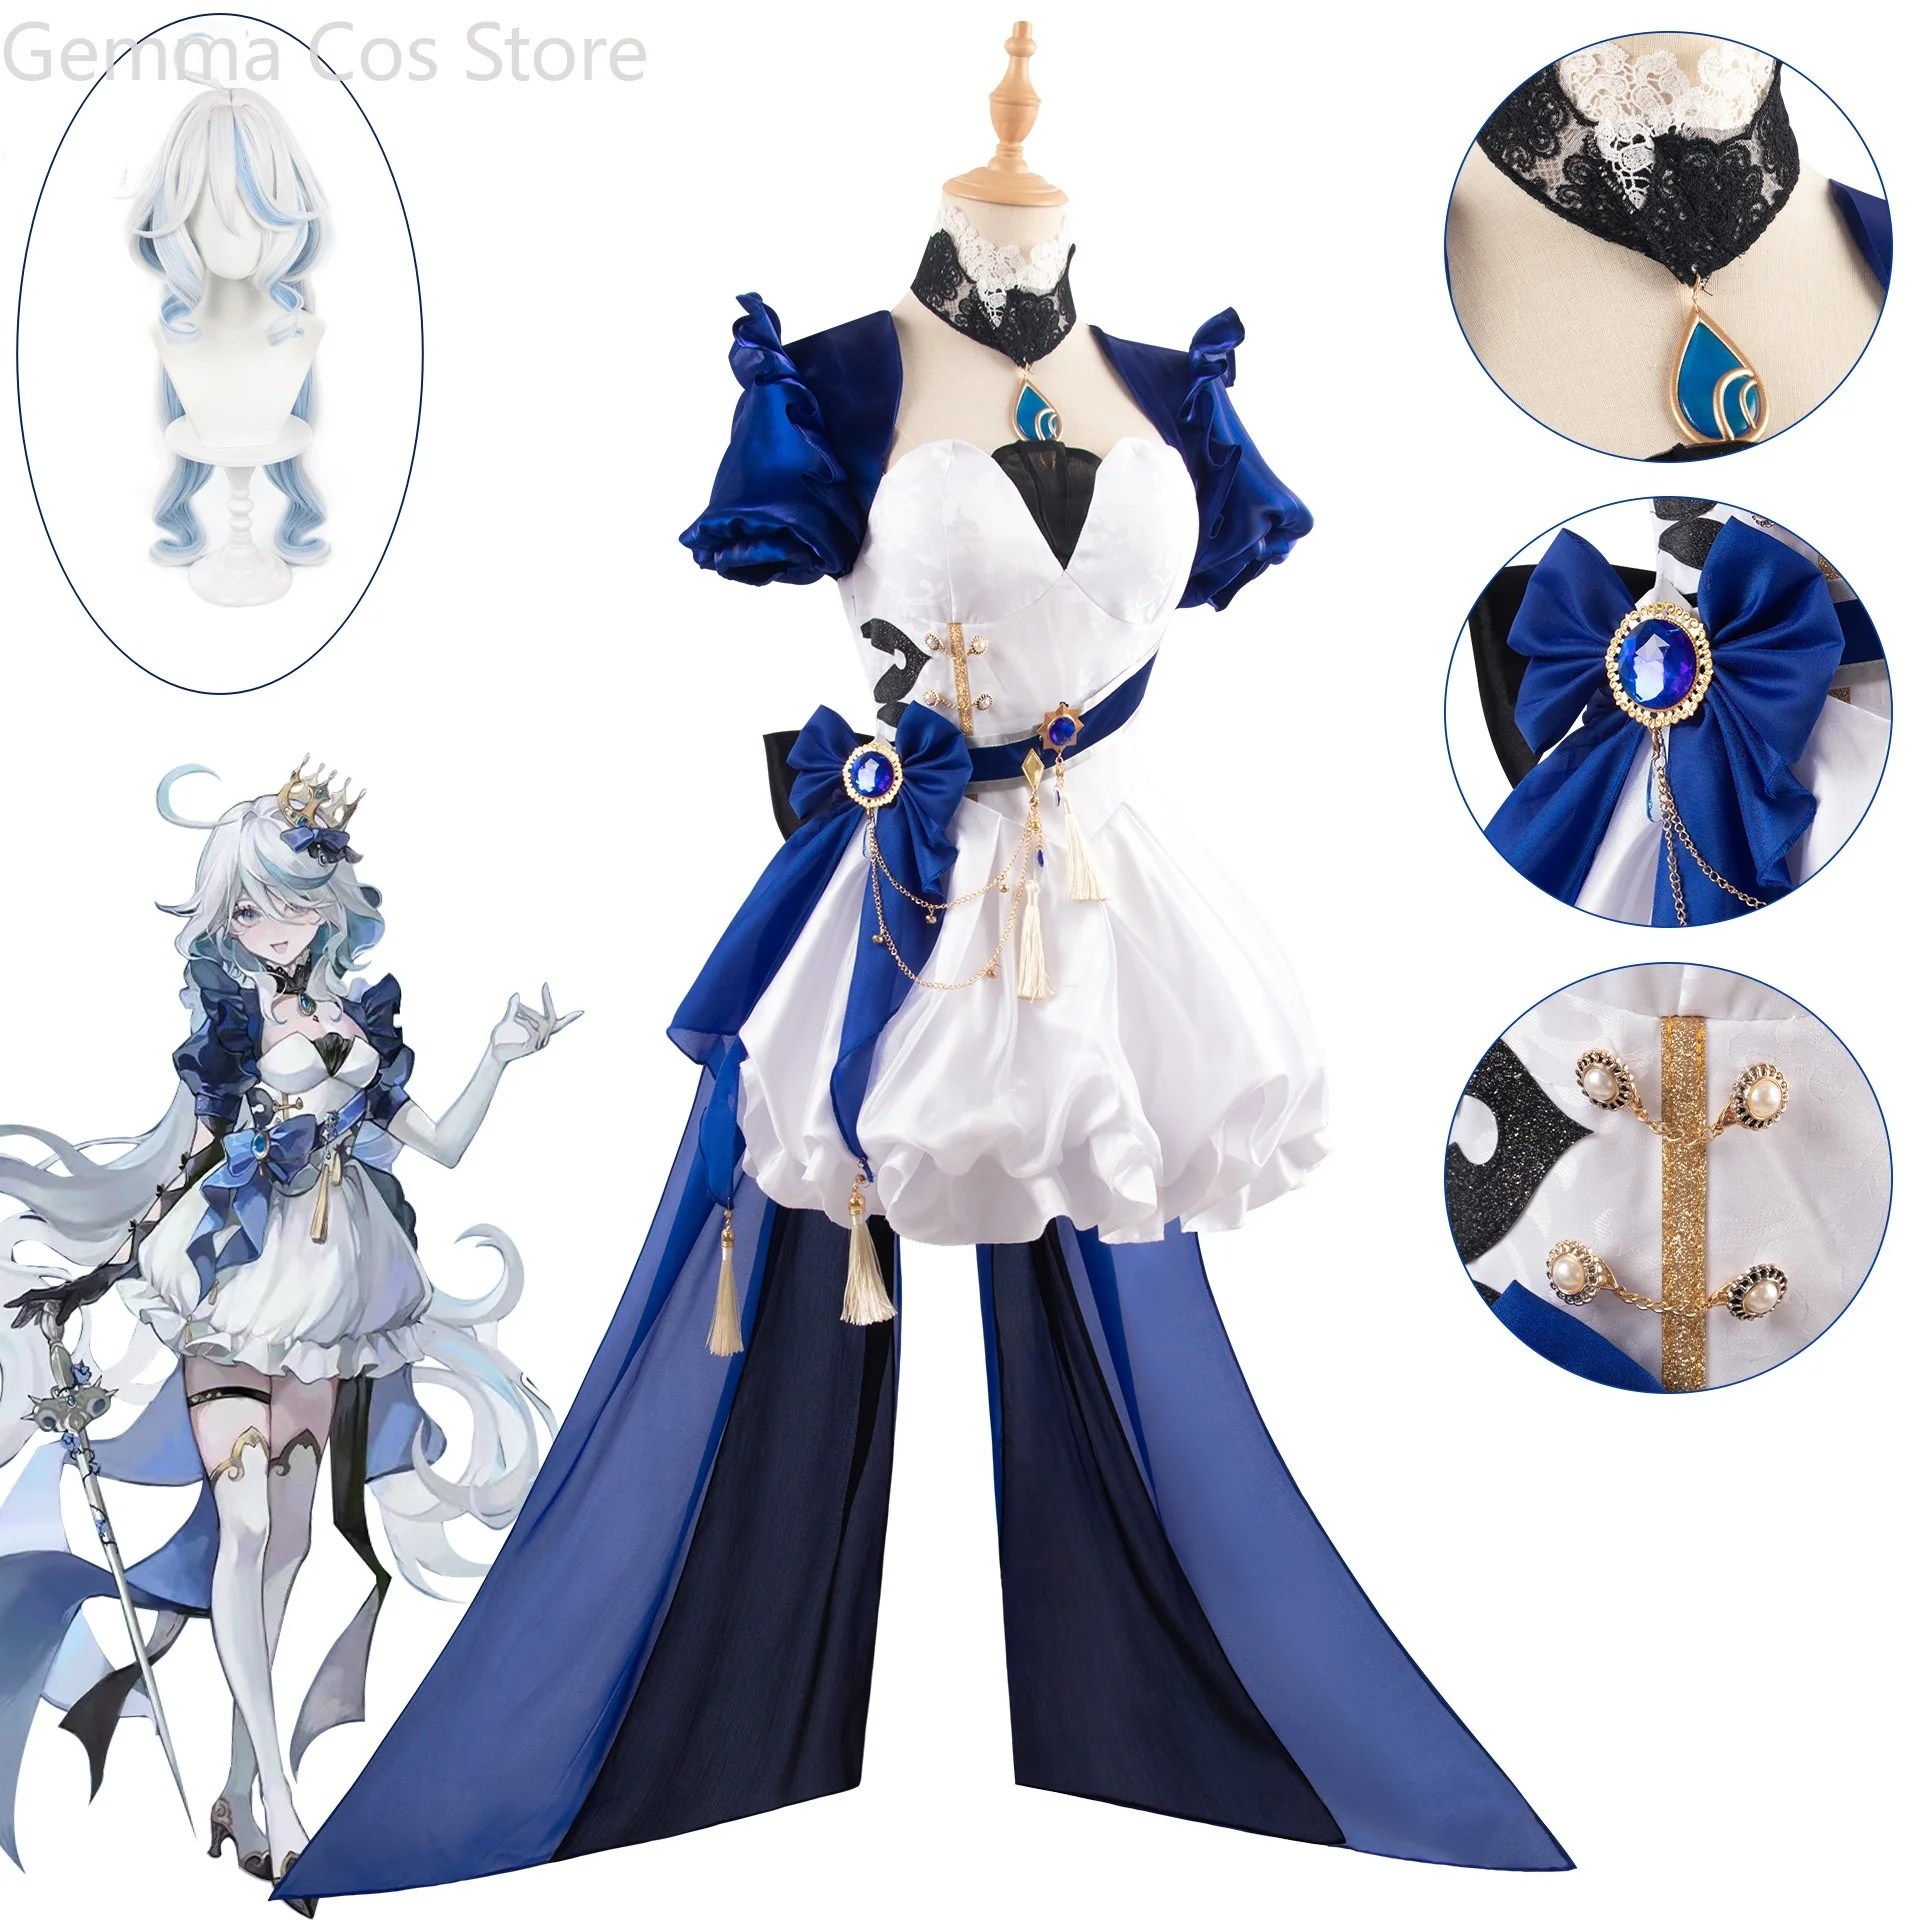 

Genshin Impact Furina Aquamarine Alice Doujin Game Suit Gorgeous Dress Cosplay Costume Halloween Party Role Play Outfit Women